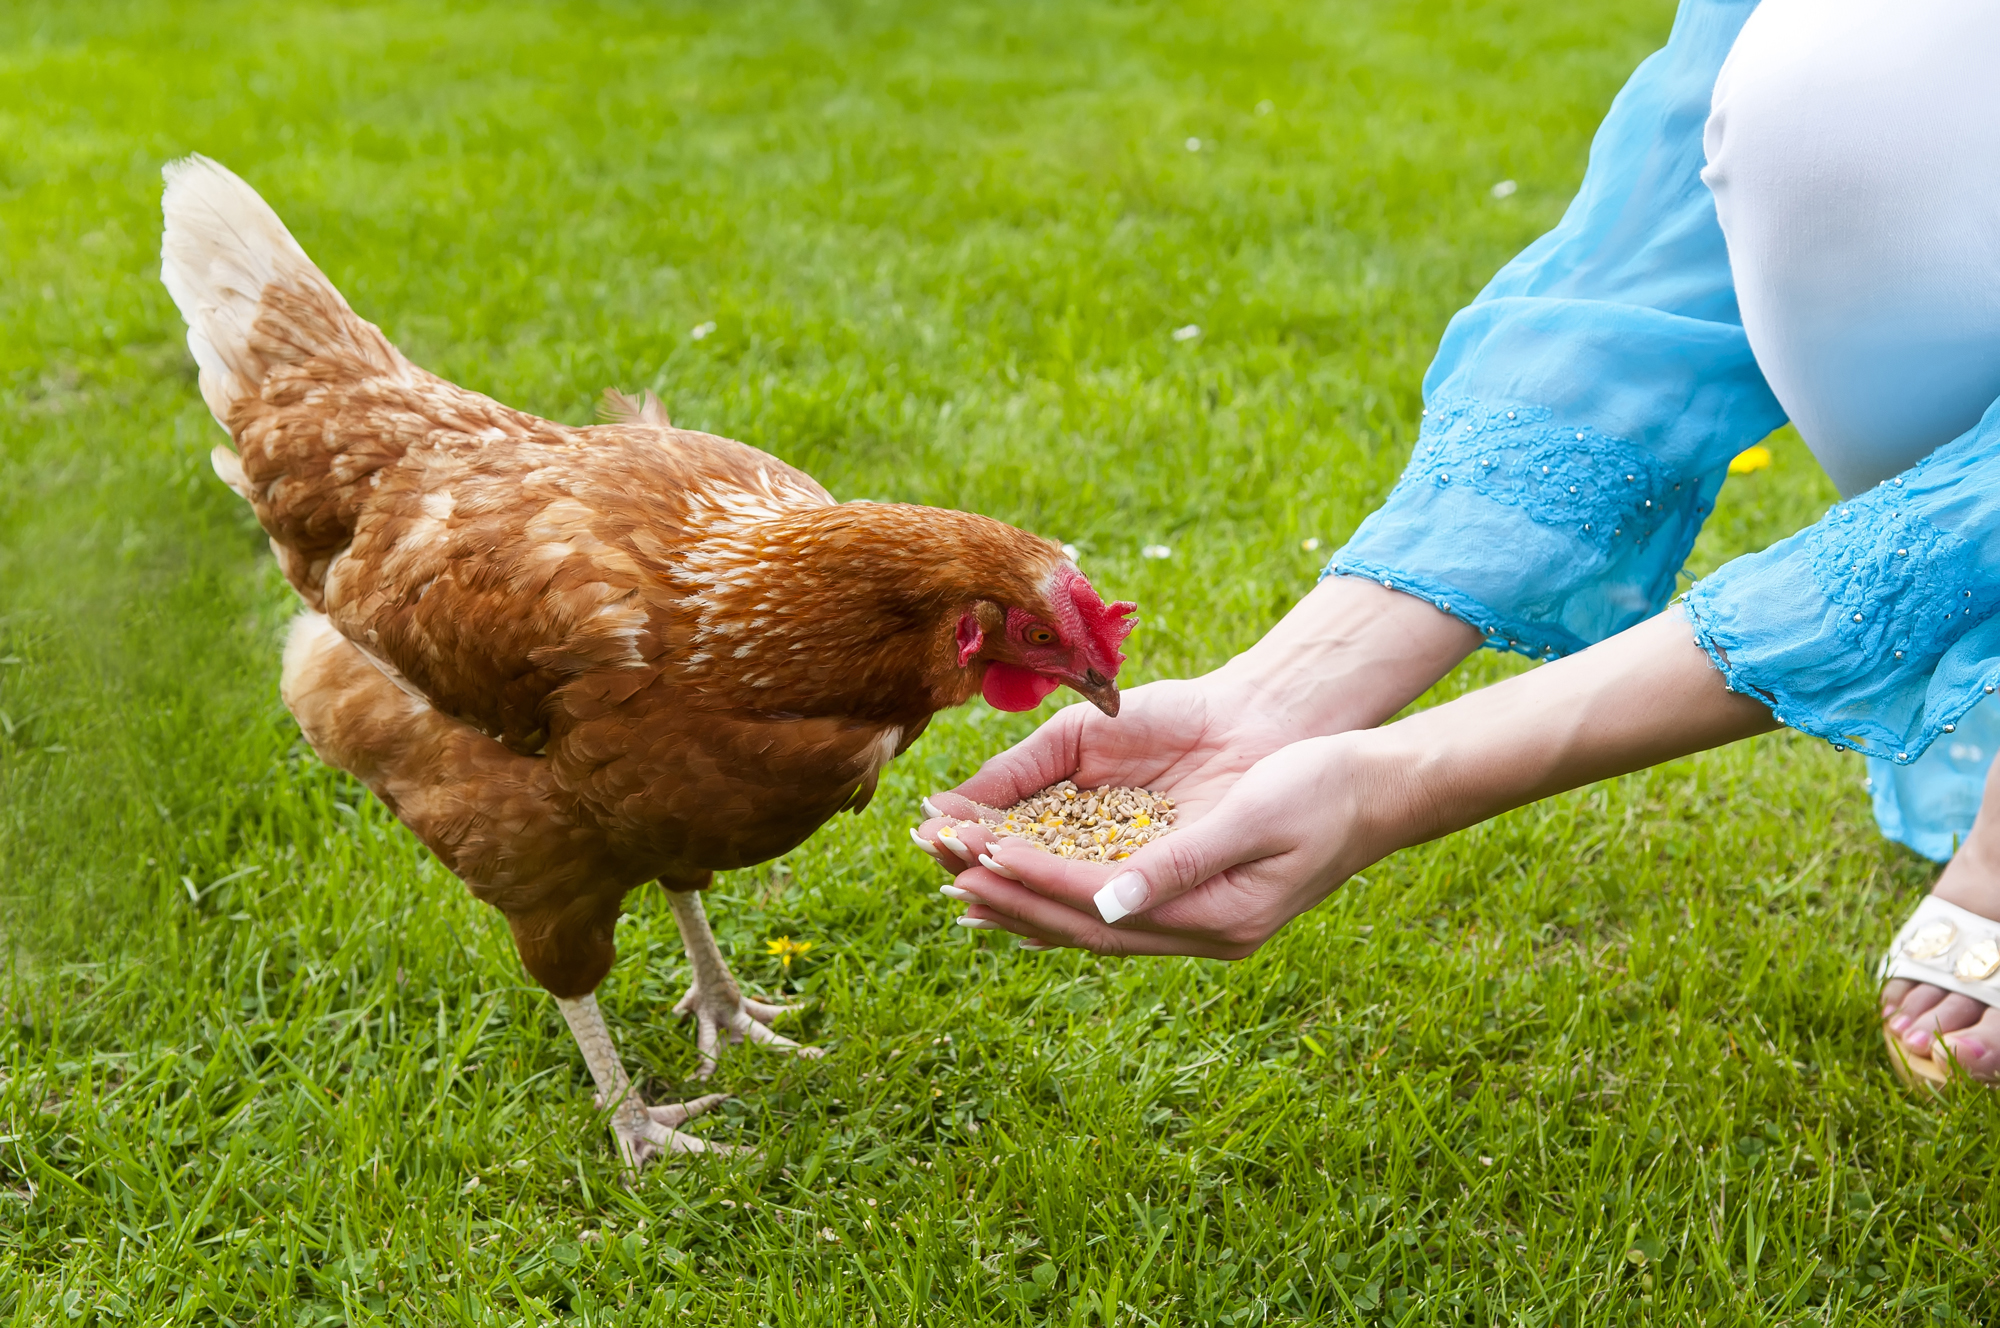 to allow their citizens to have some chickens in urbans areas.And if your e...